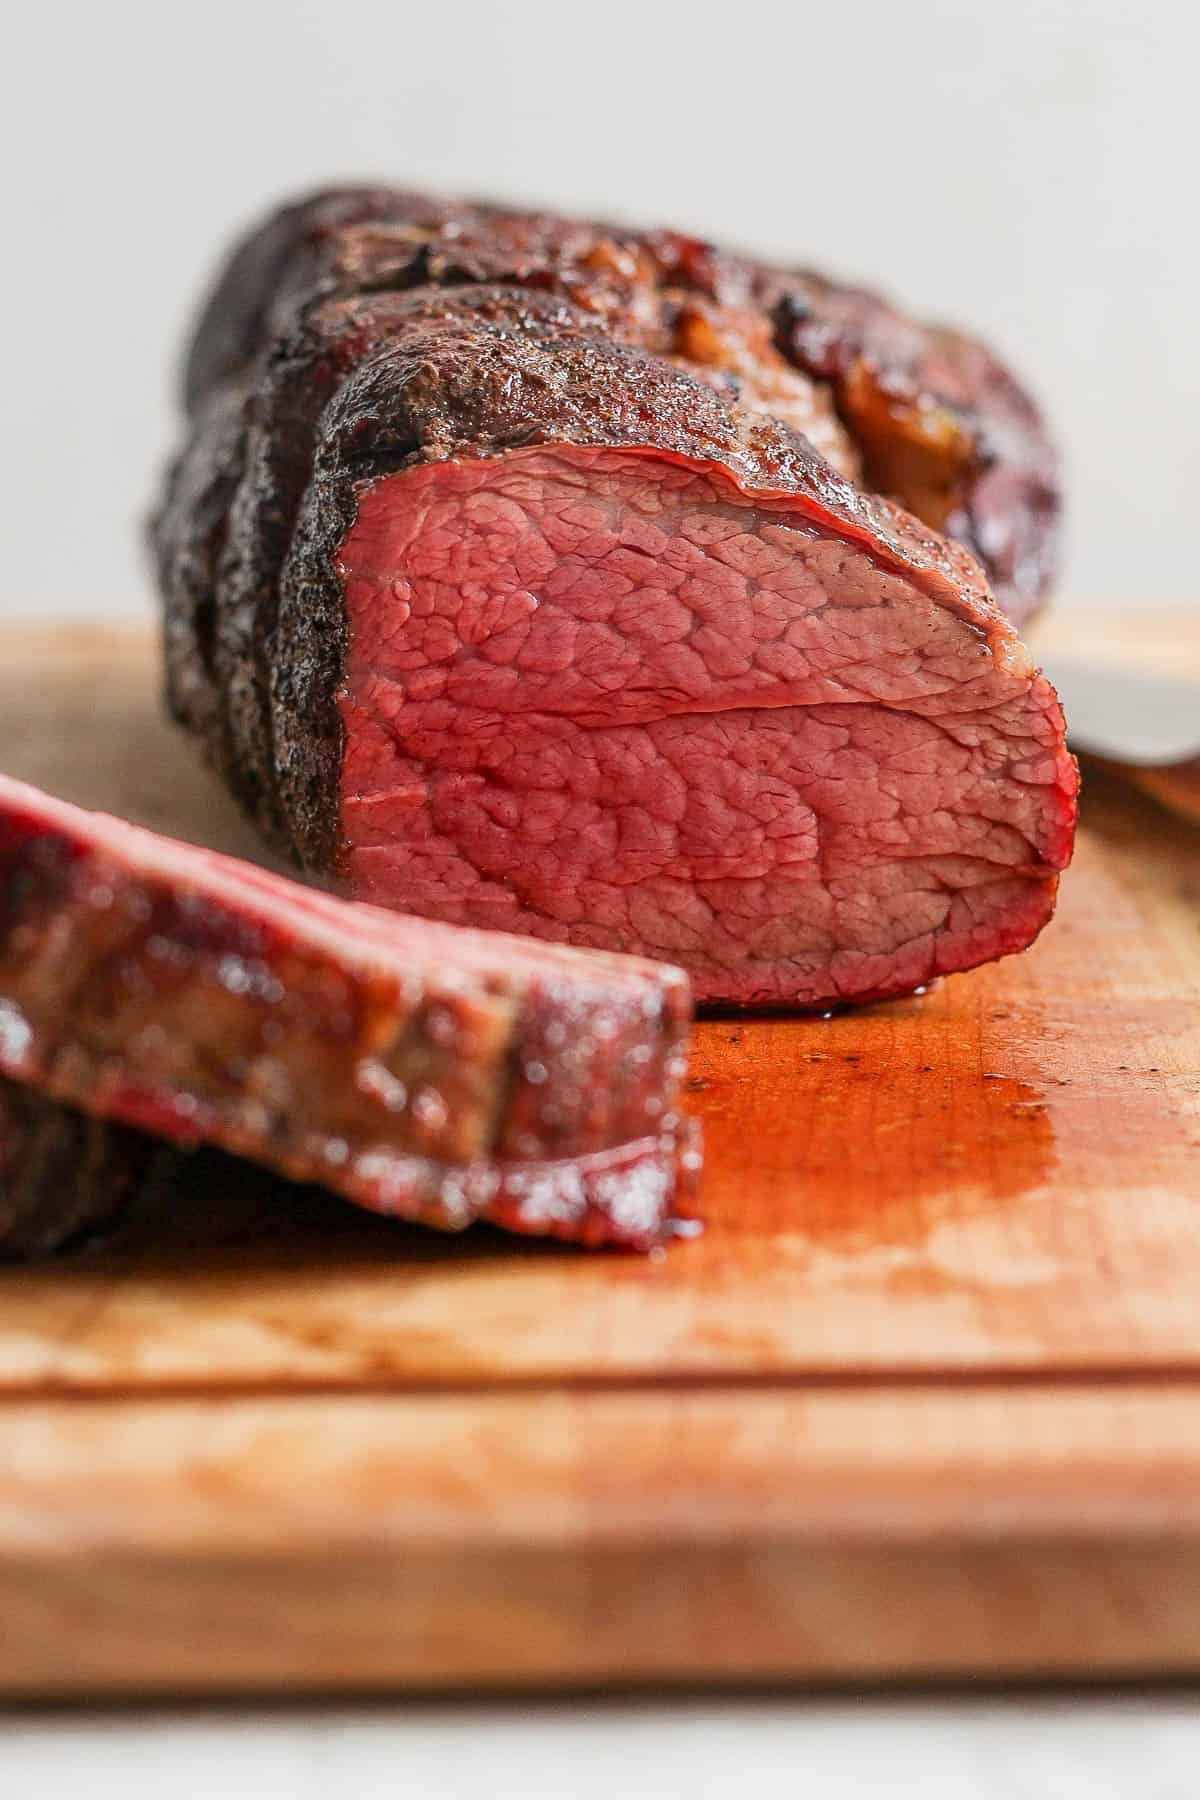 A beef tenderloin on a cutting board and being cut into slices.